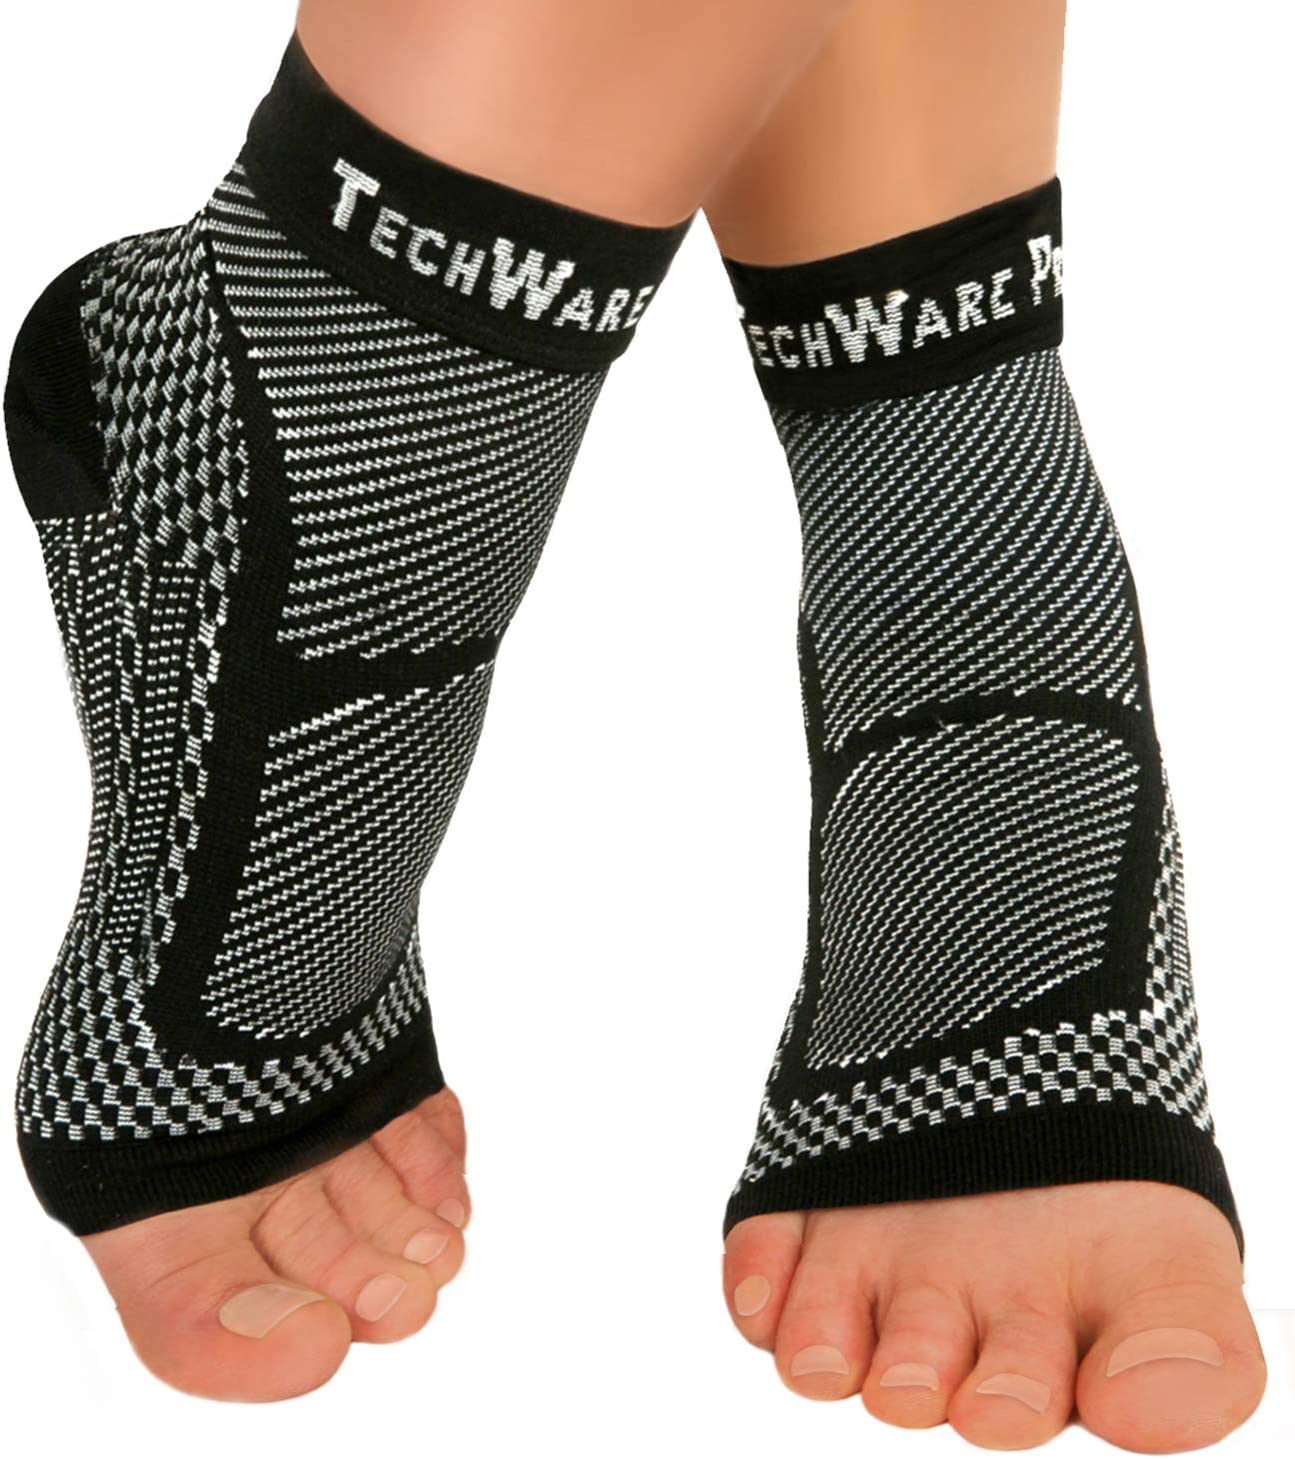 TechWare Pro 4-Way Stretch Ankle Compression Sleeves, 1-Pair